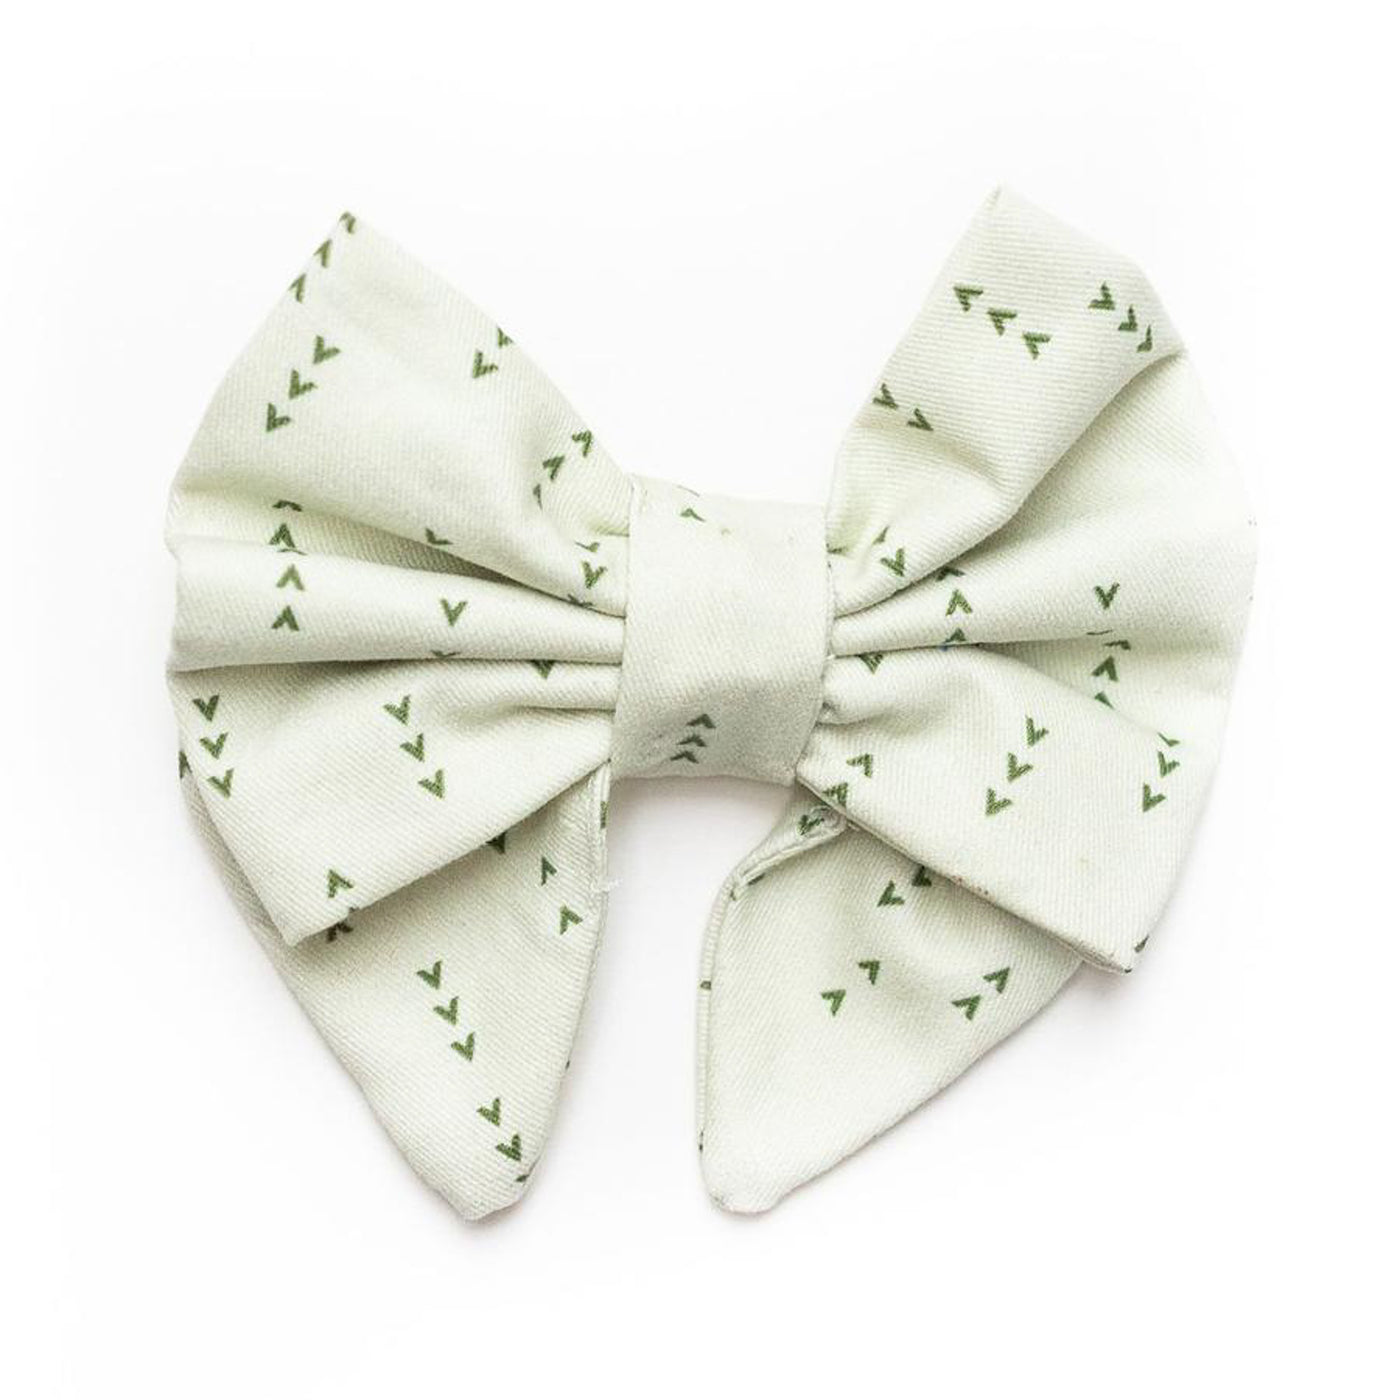 Sailor dog bow in light green with dark green arrows